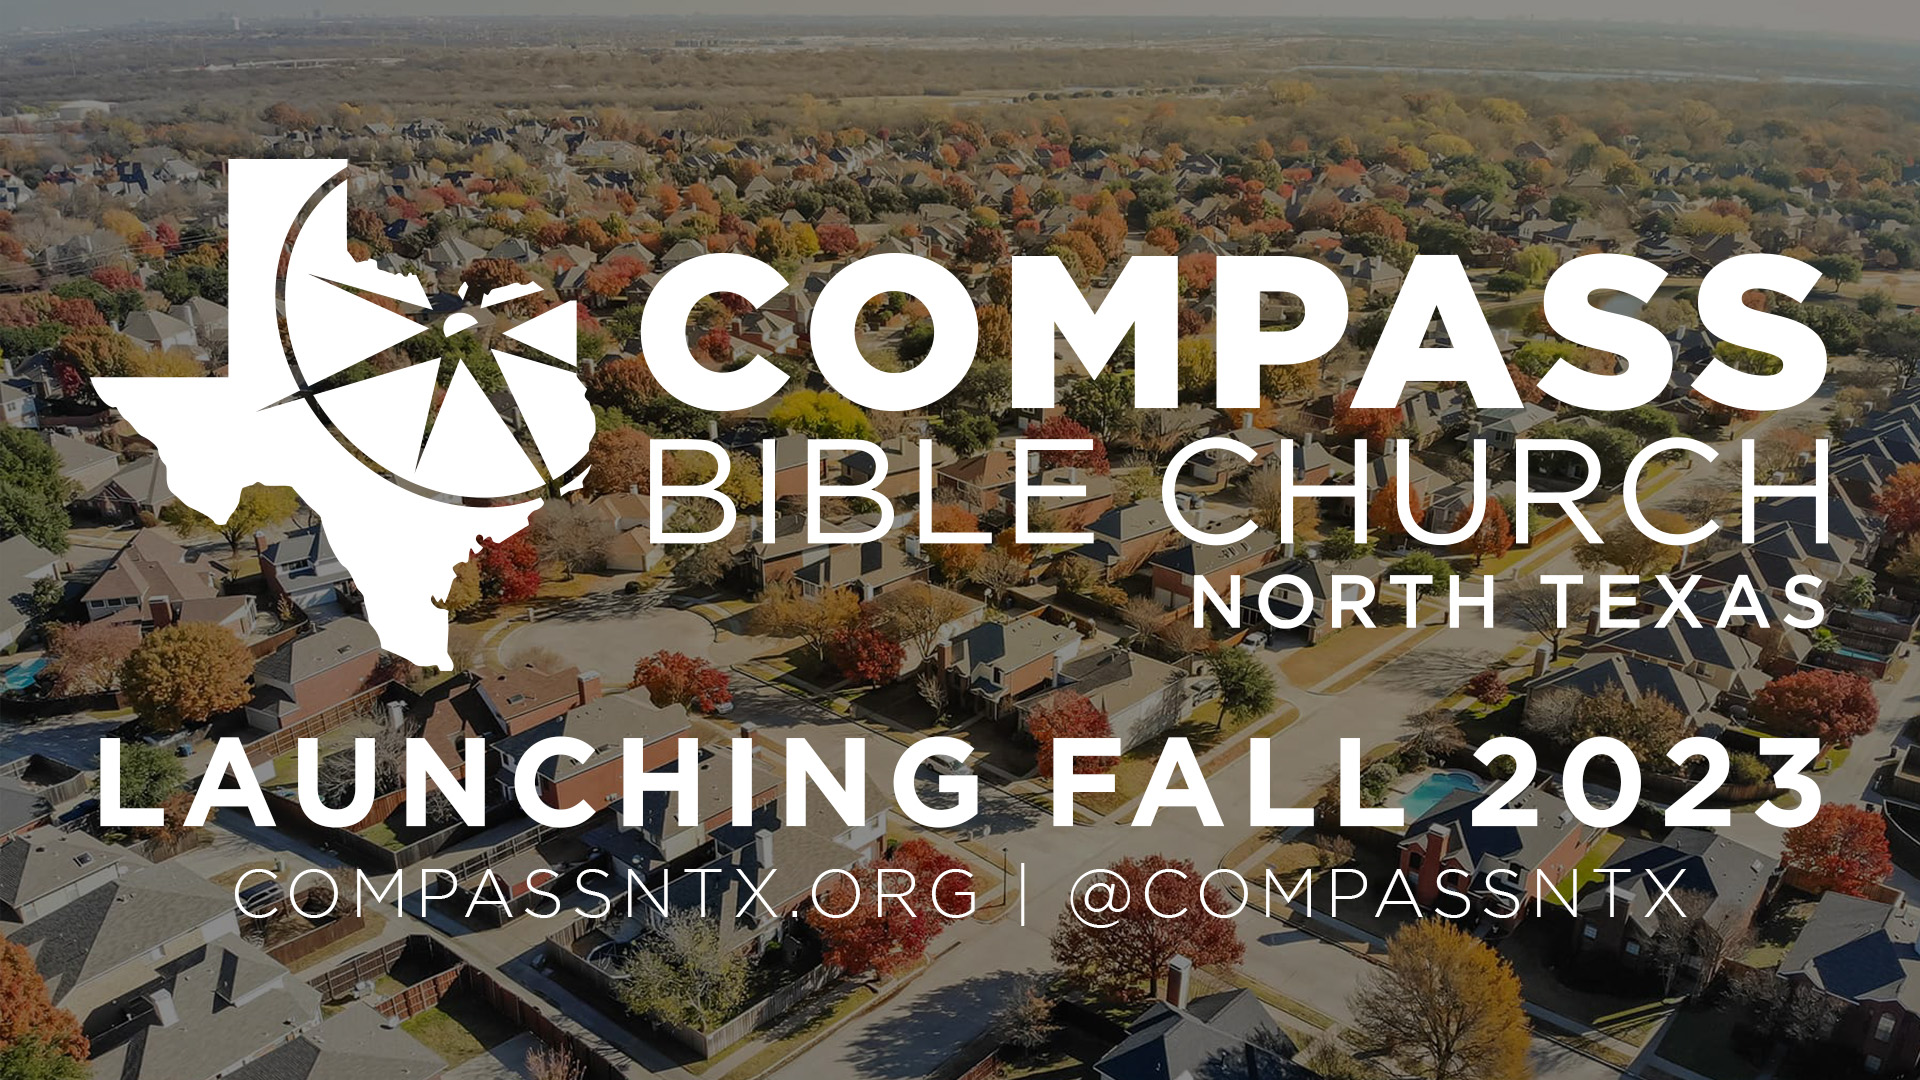 Compass Bible Church North Texas to Launch in Fall 2023